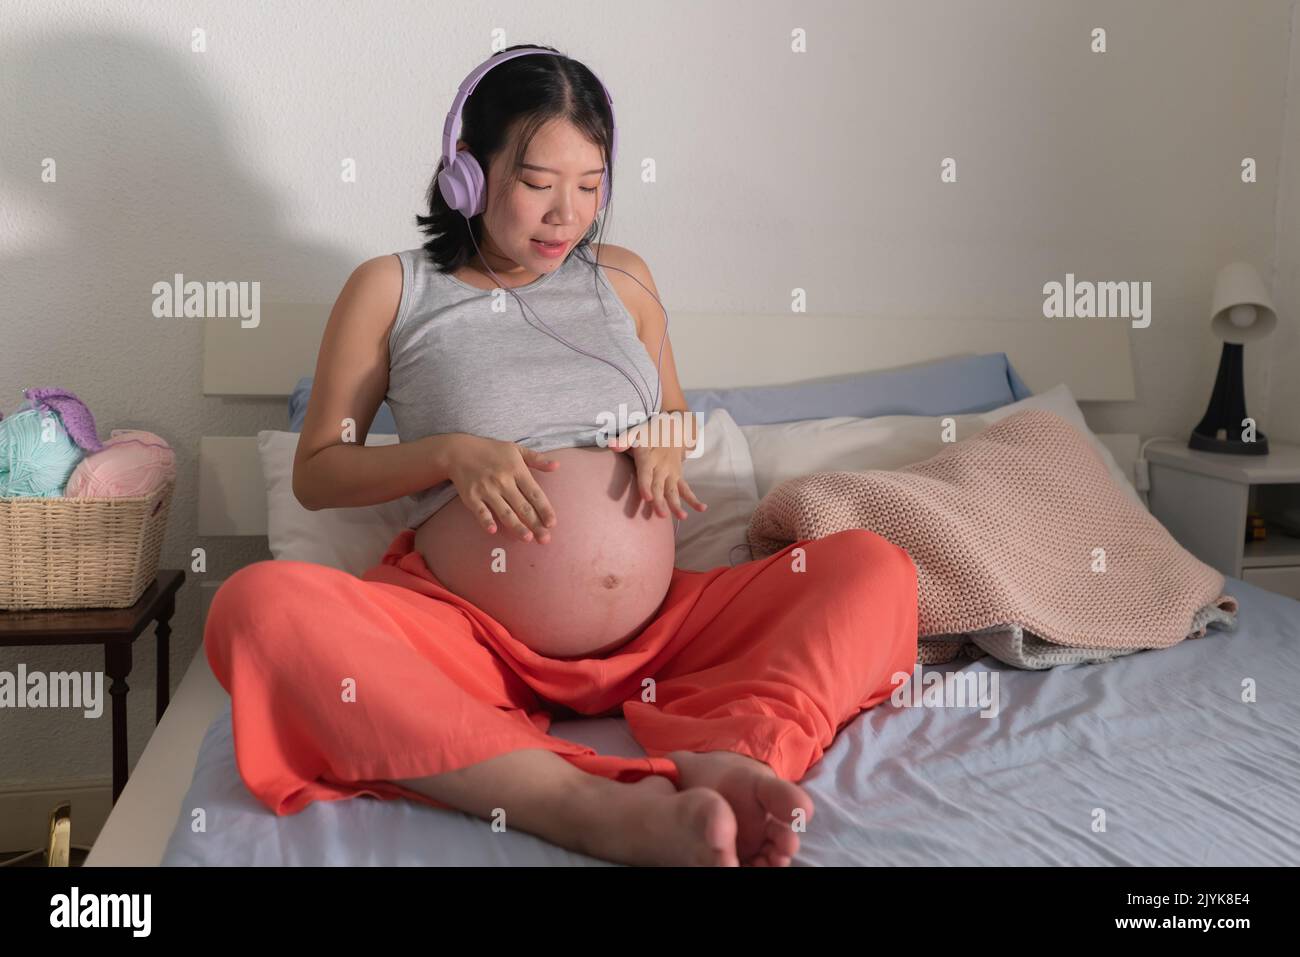 pregnancy lifestyle home portrait of young happy and beautiful Asian Chinese woman sitting pregnant on bed listening to music with headphones touching Stock Photo